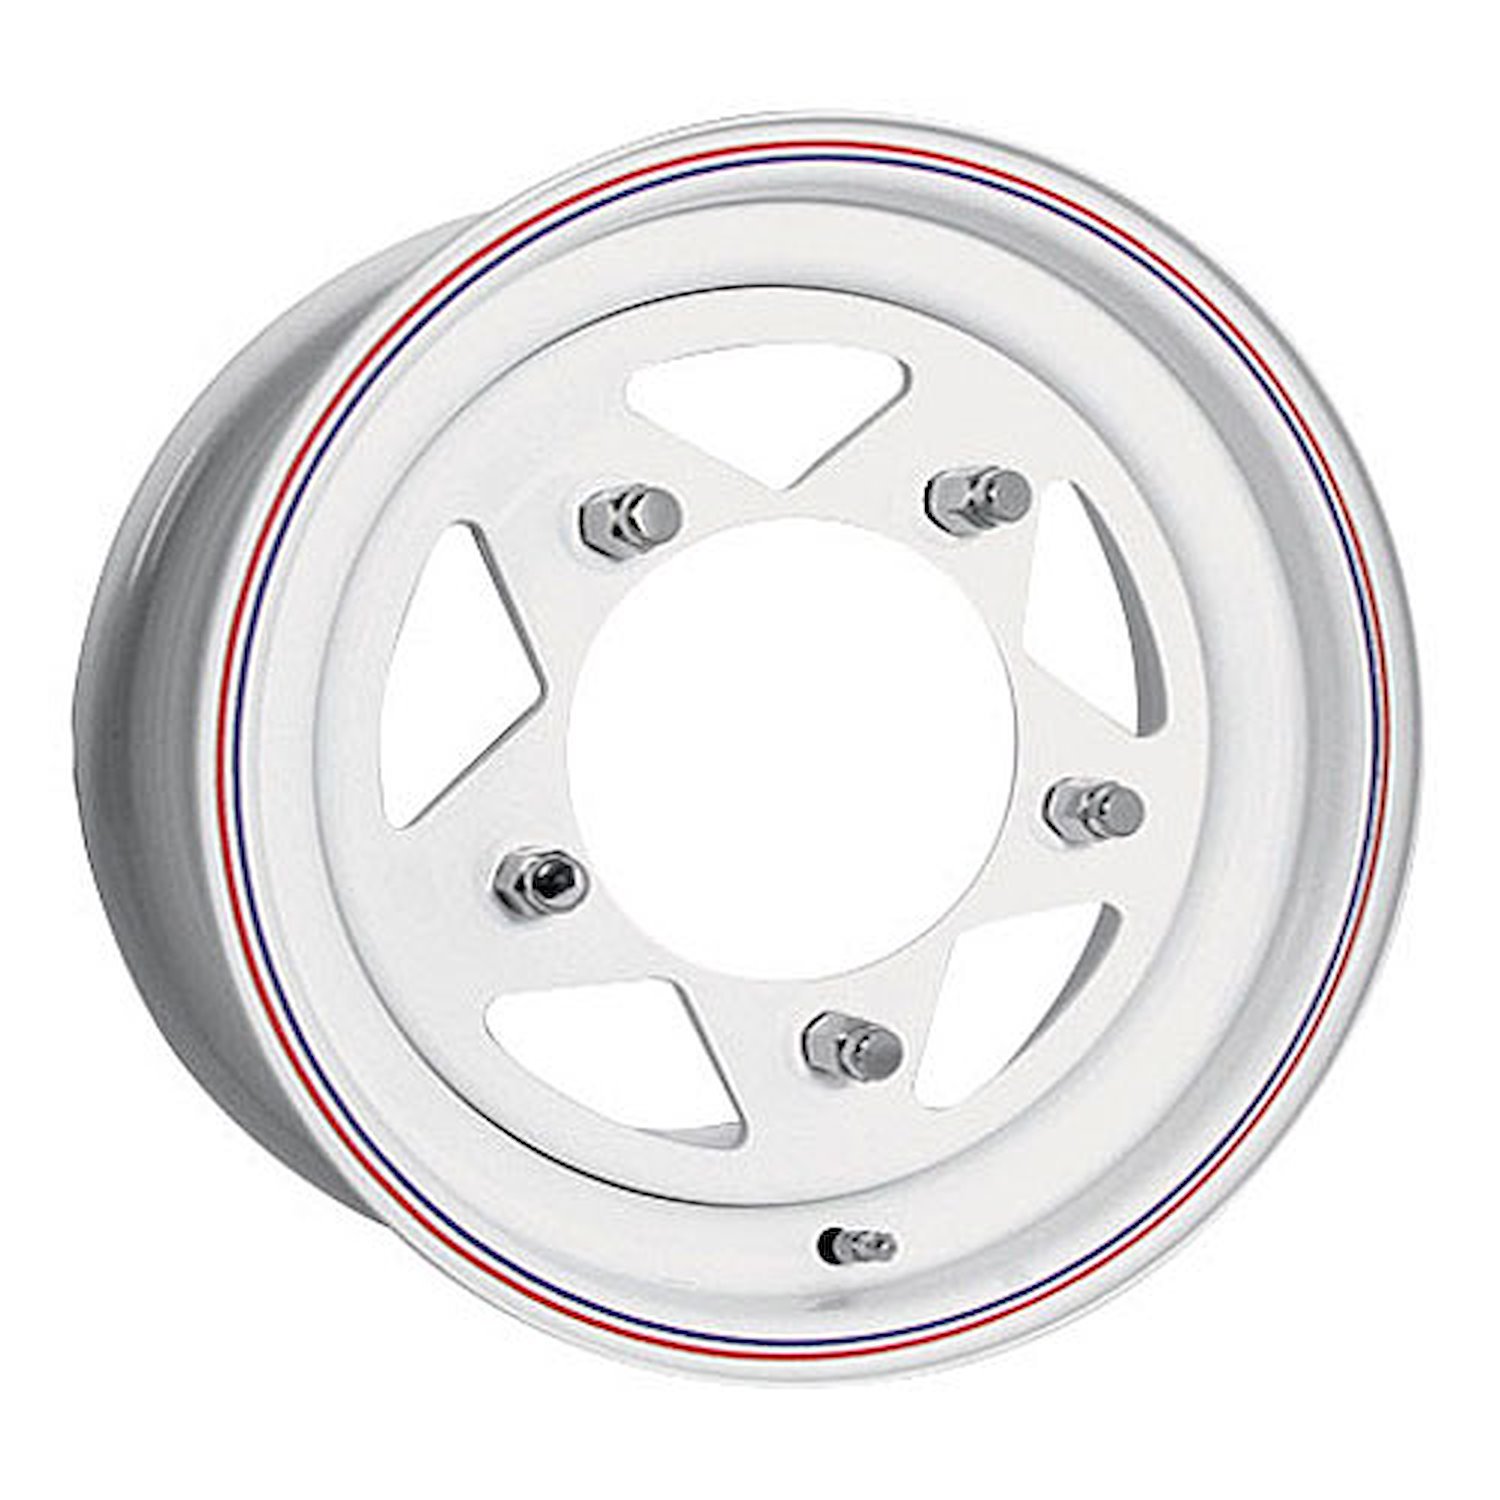 WHITE BAJA STAR VW 15 x 10 5 x 205 Bolt Circle 35 Back Spacing 51 offset 160 Center Bore 1100 lbs Load Rating